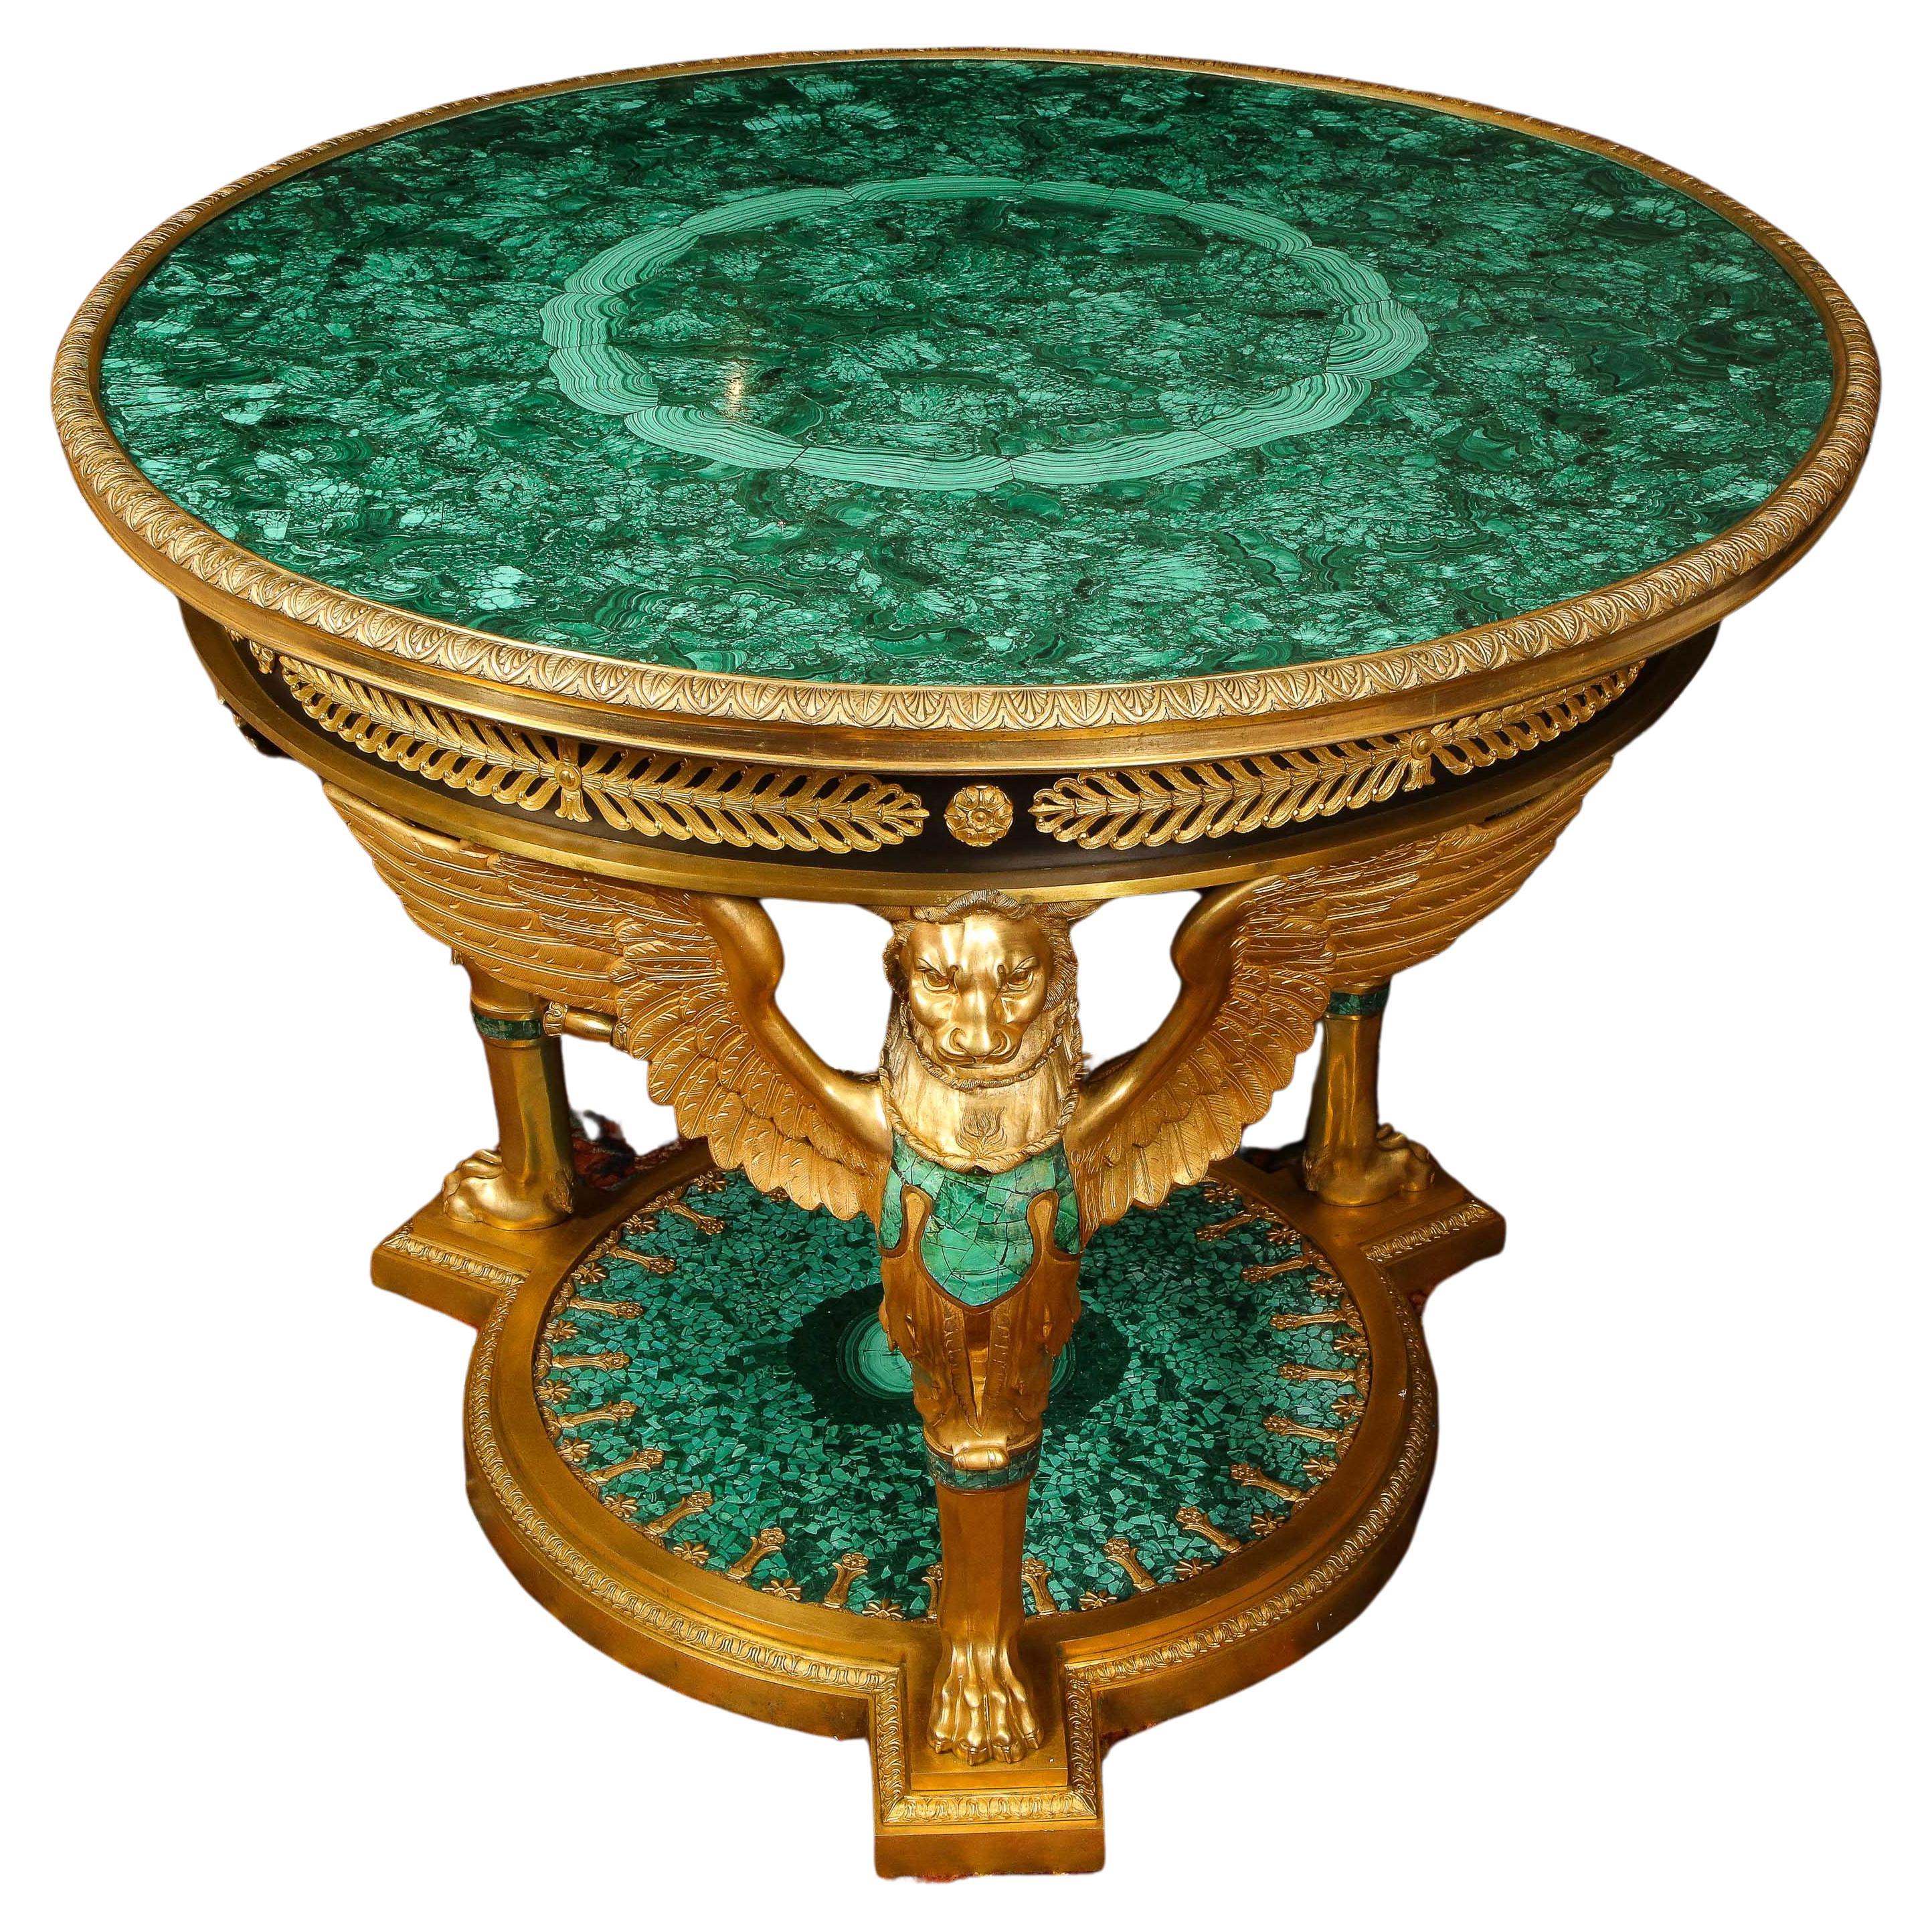 A large and impressive empire style ormolu and malachite center table

With a circular malachite-inset top with floral-cast bronze border rim, above a conforming frieze applied with alternating rosettes and anthemia, sitting on triple winged-lion